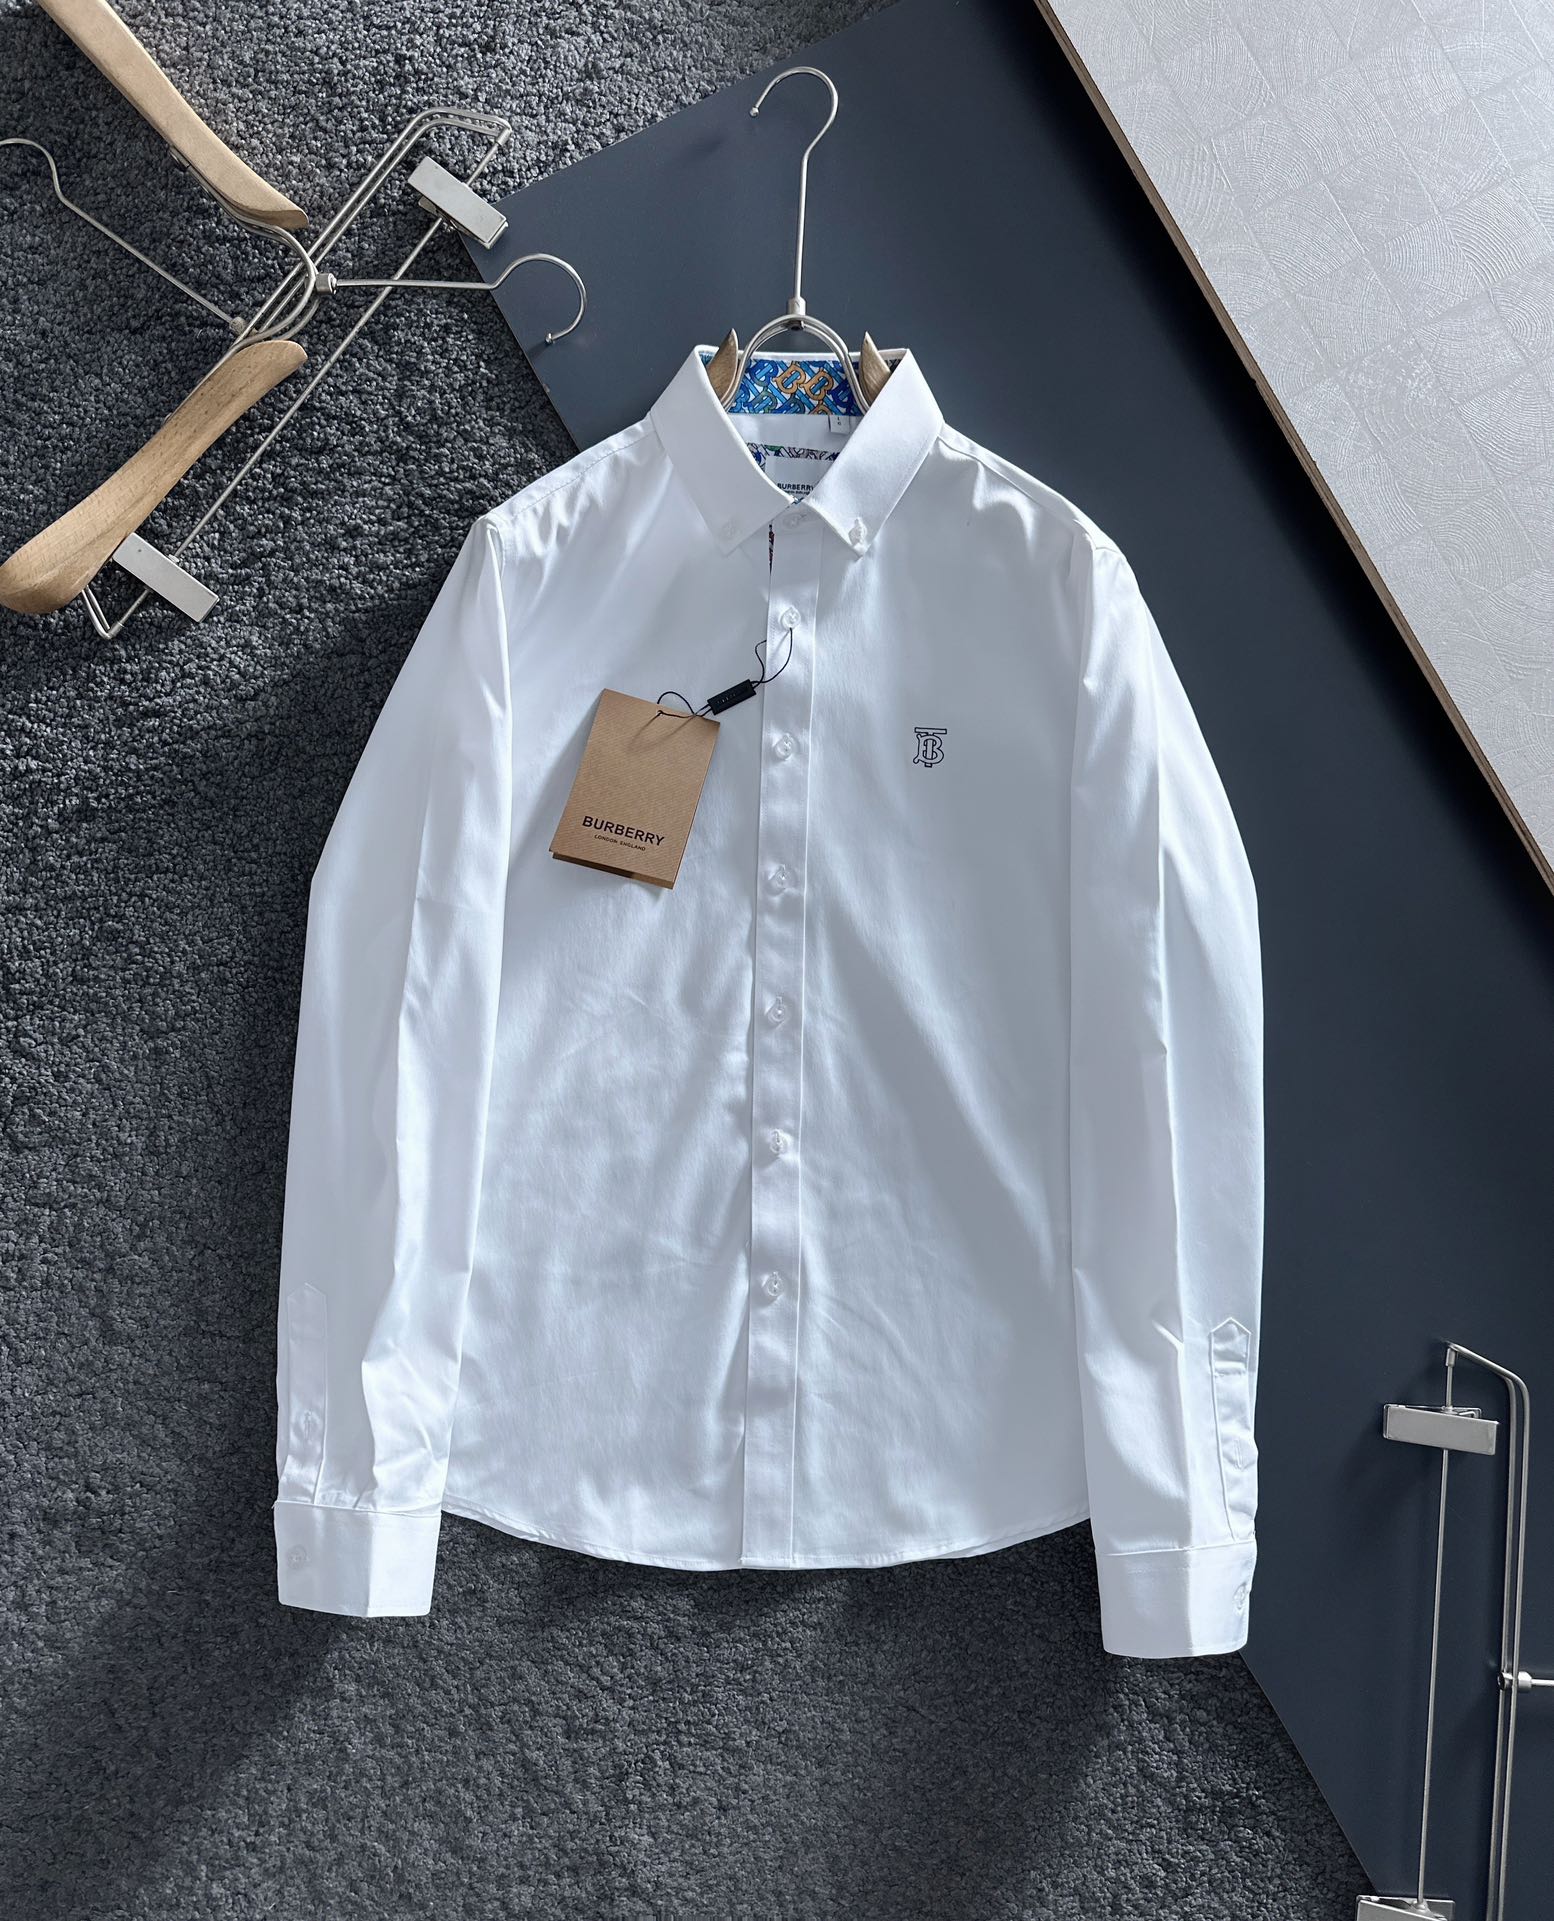 Burberry Clothing Shirts & Blouses Cotton Spring Collection Fashion